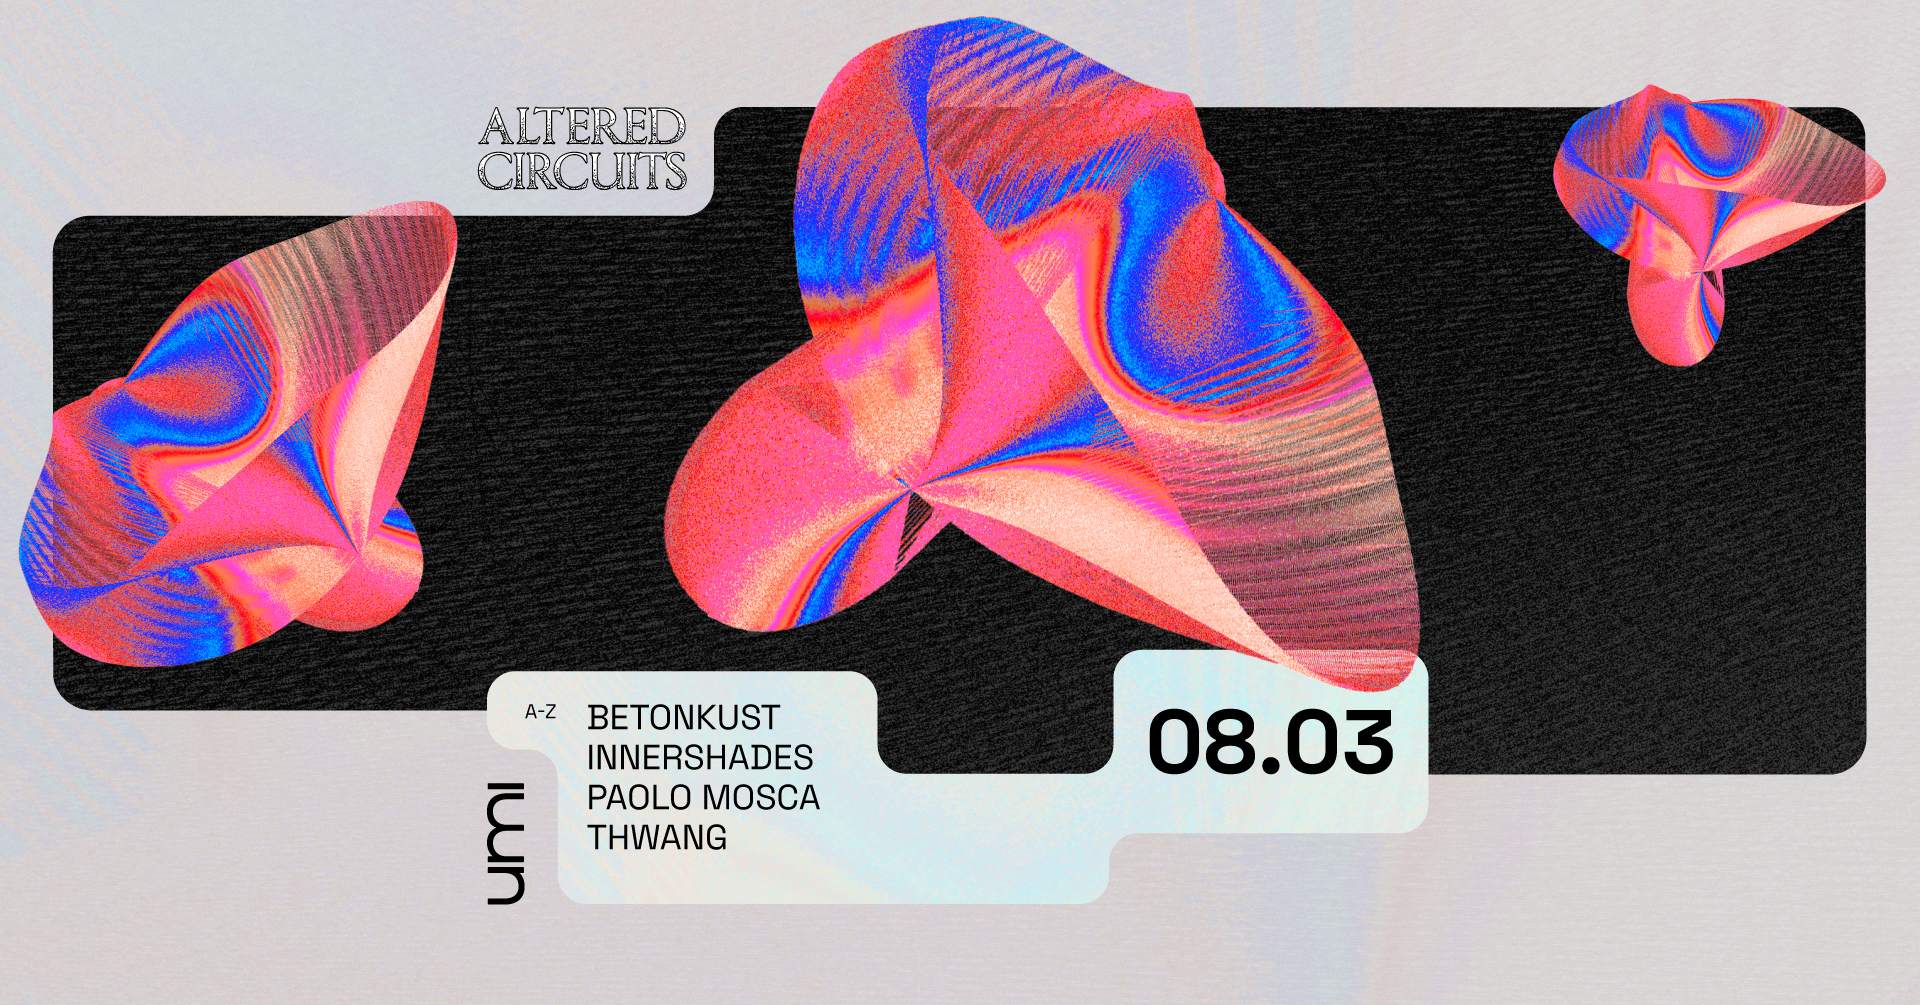 UMI x Altered Circuit with Paolo Mosca, Innershades, Betonkust, Thwang - Página frontal